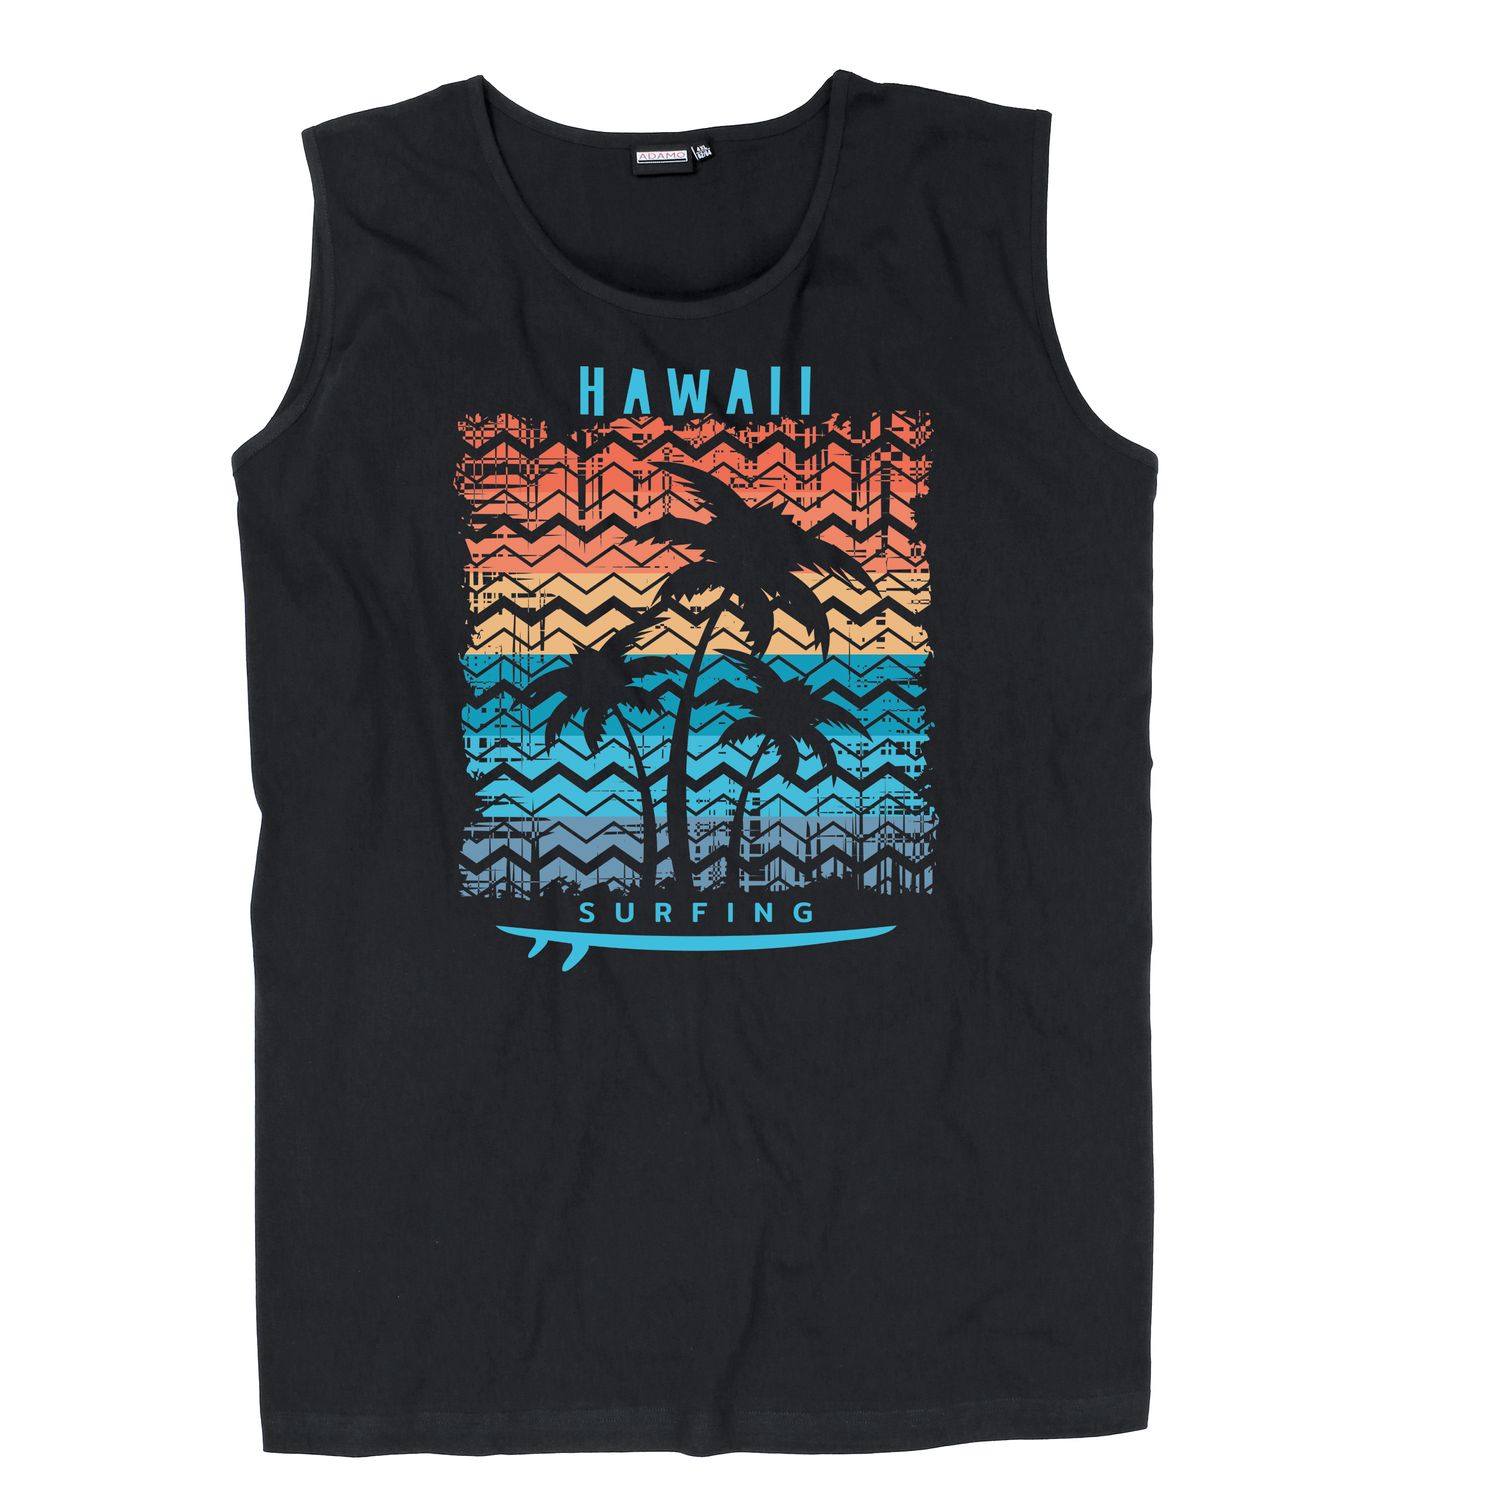 Printed muscle shirt from ADAMO in black in sizes 2XL-12XL series "Hawaii"